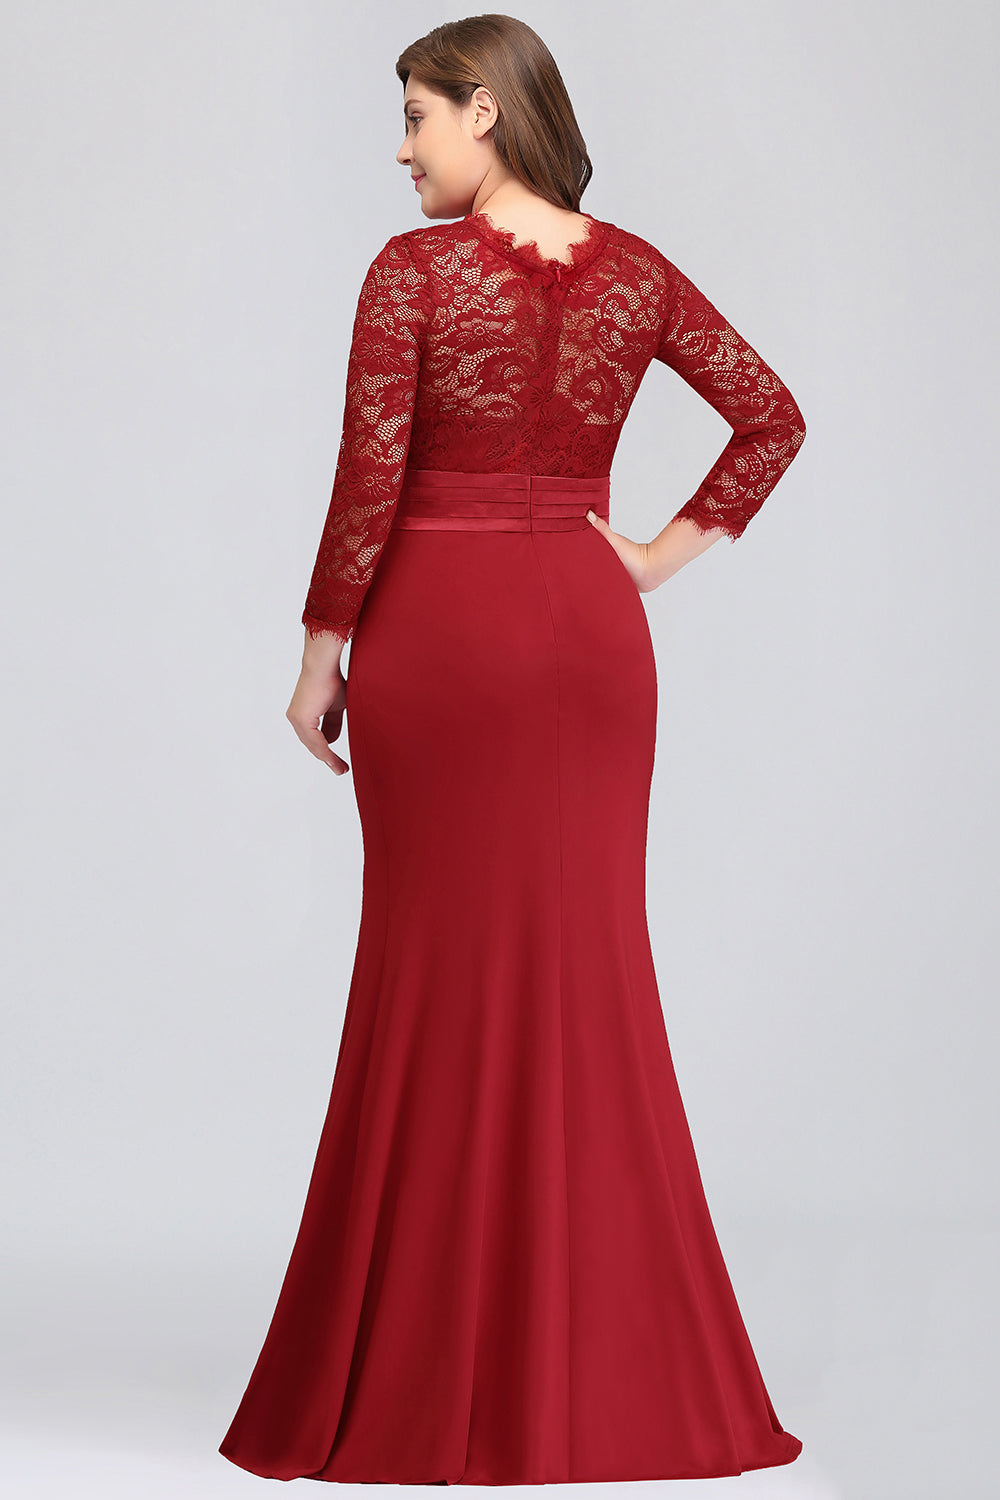 Load image into Gallery viewer, Plus Size Mermaid Long Red Lace Bridesmaid Dresses with 3/4 Sleeves-27dress
